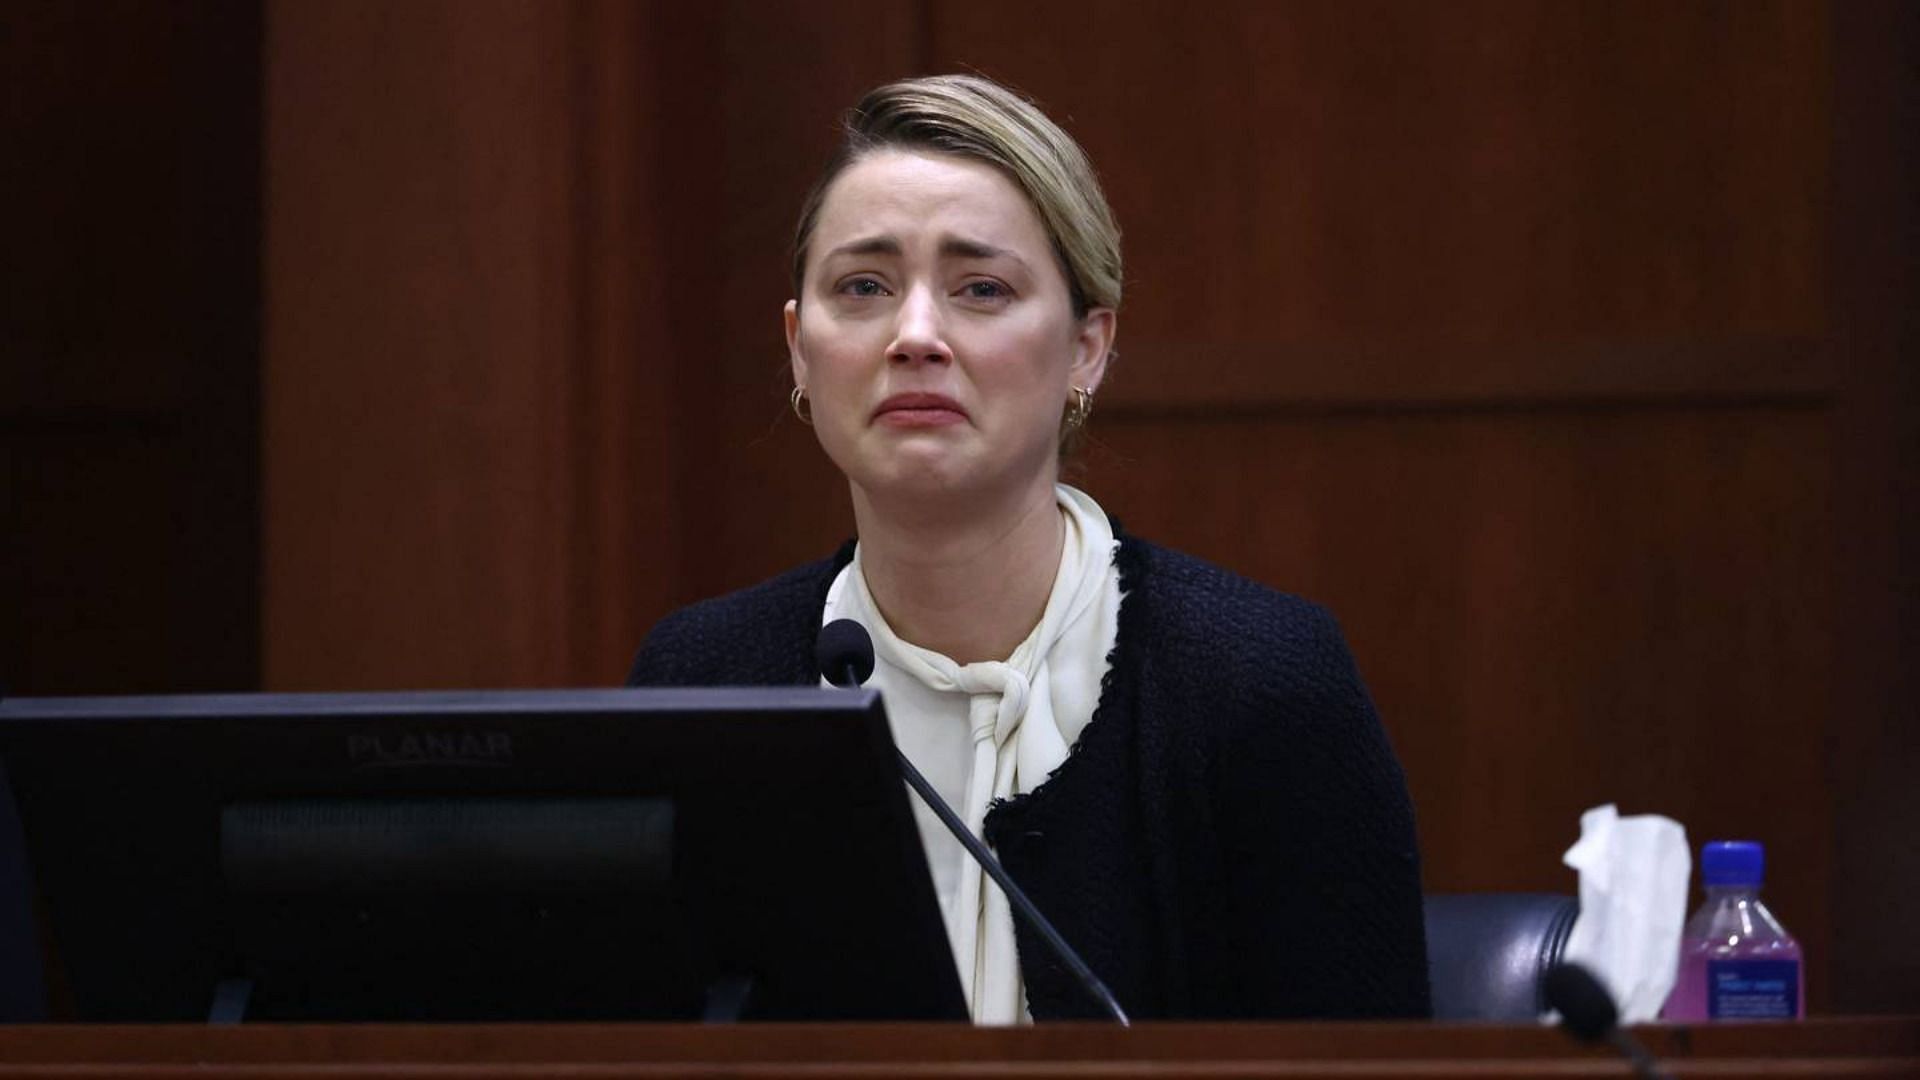 Amber Heard has been falsely accused by Twitterati of using film dialogue during her trial (Image via Jim Lo Scalzo/Getty Images)